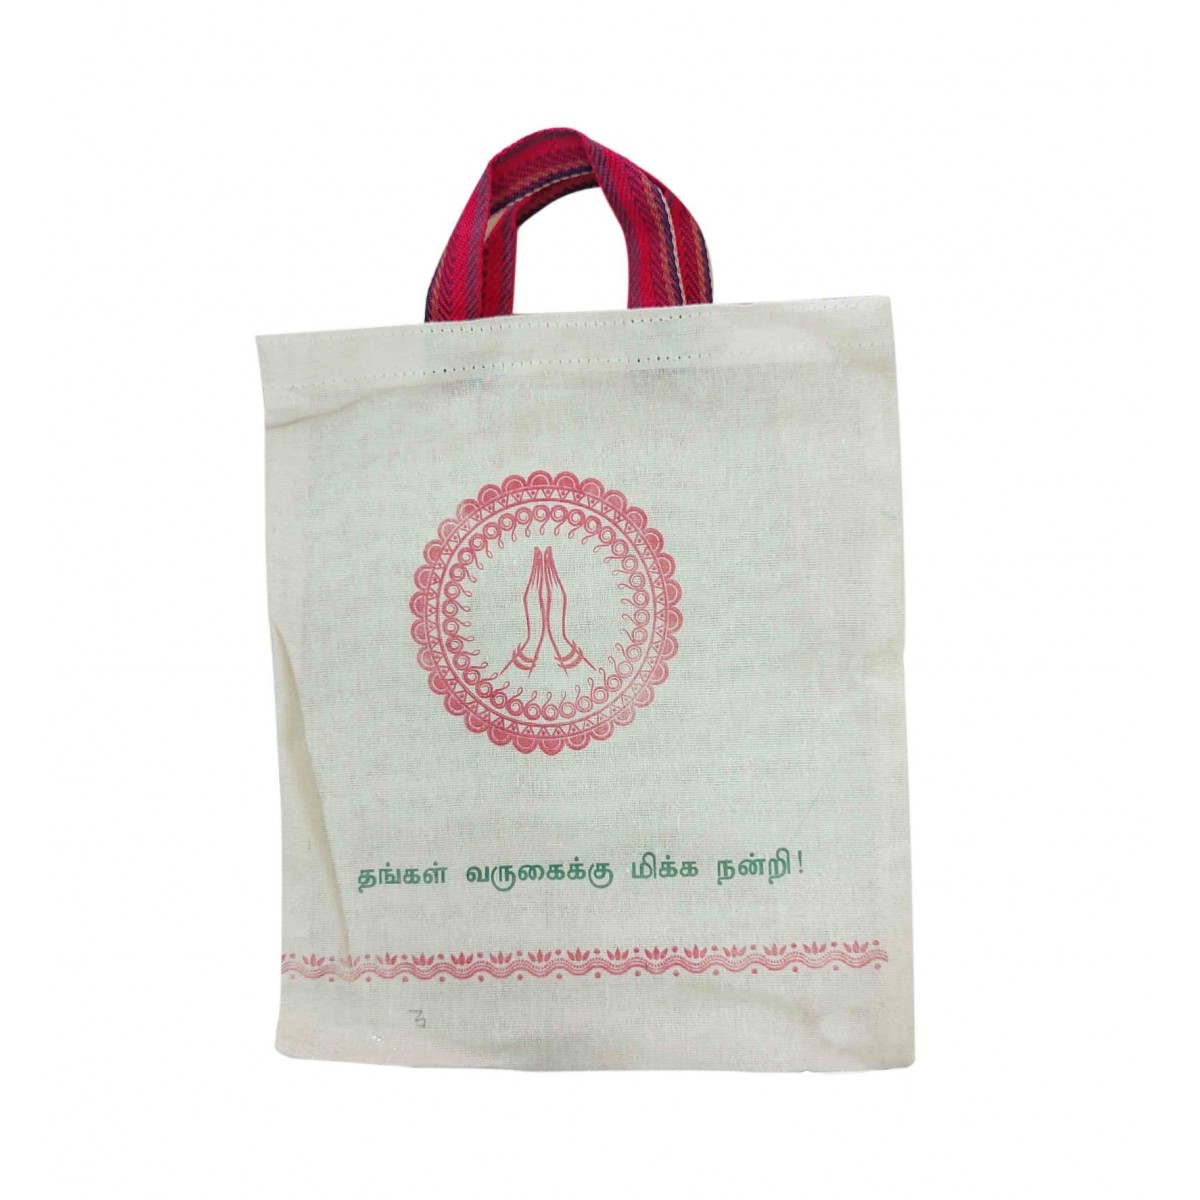 Jute Bags for Return Gifts: A Sustainable and Stylish Option